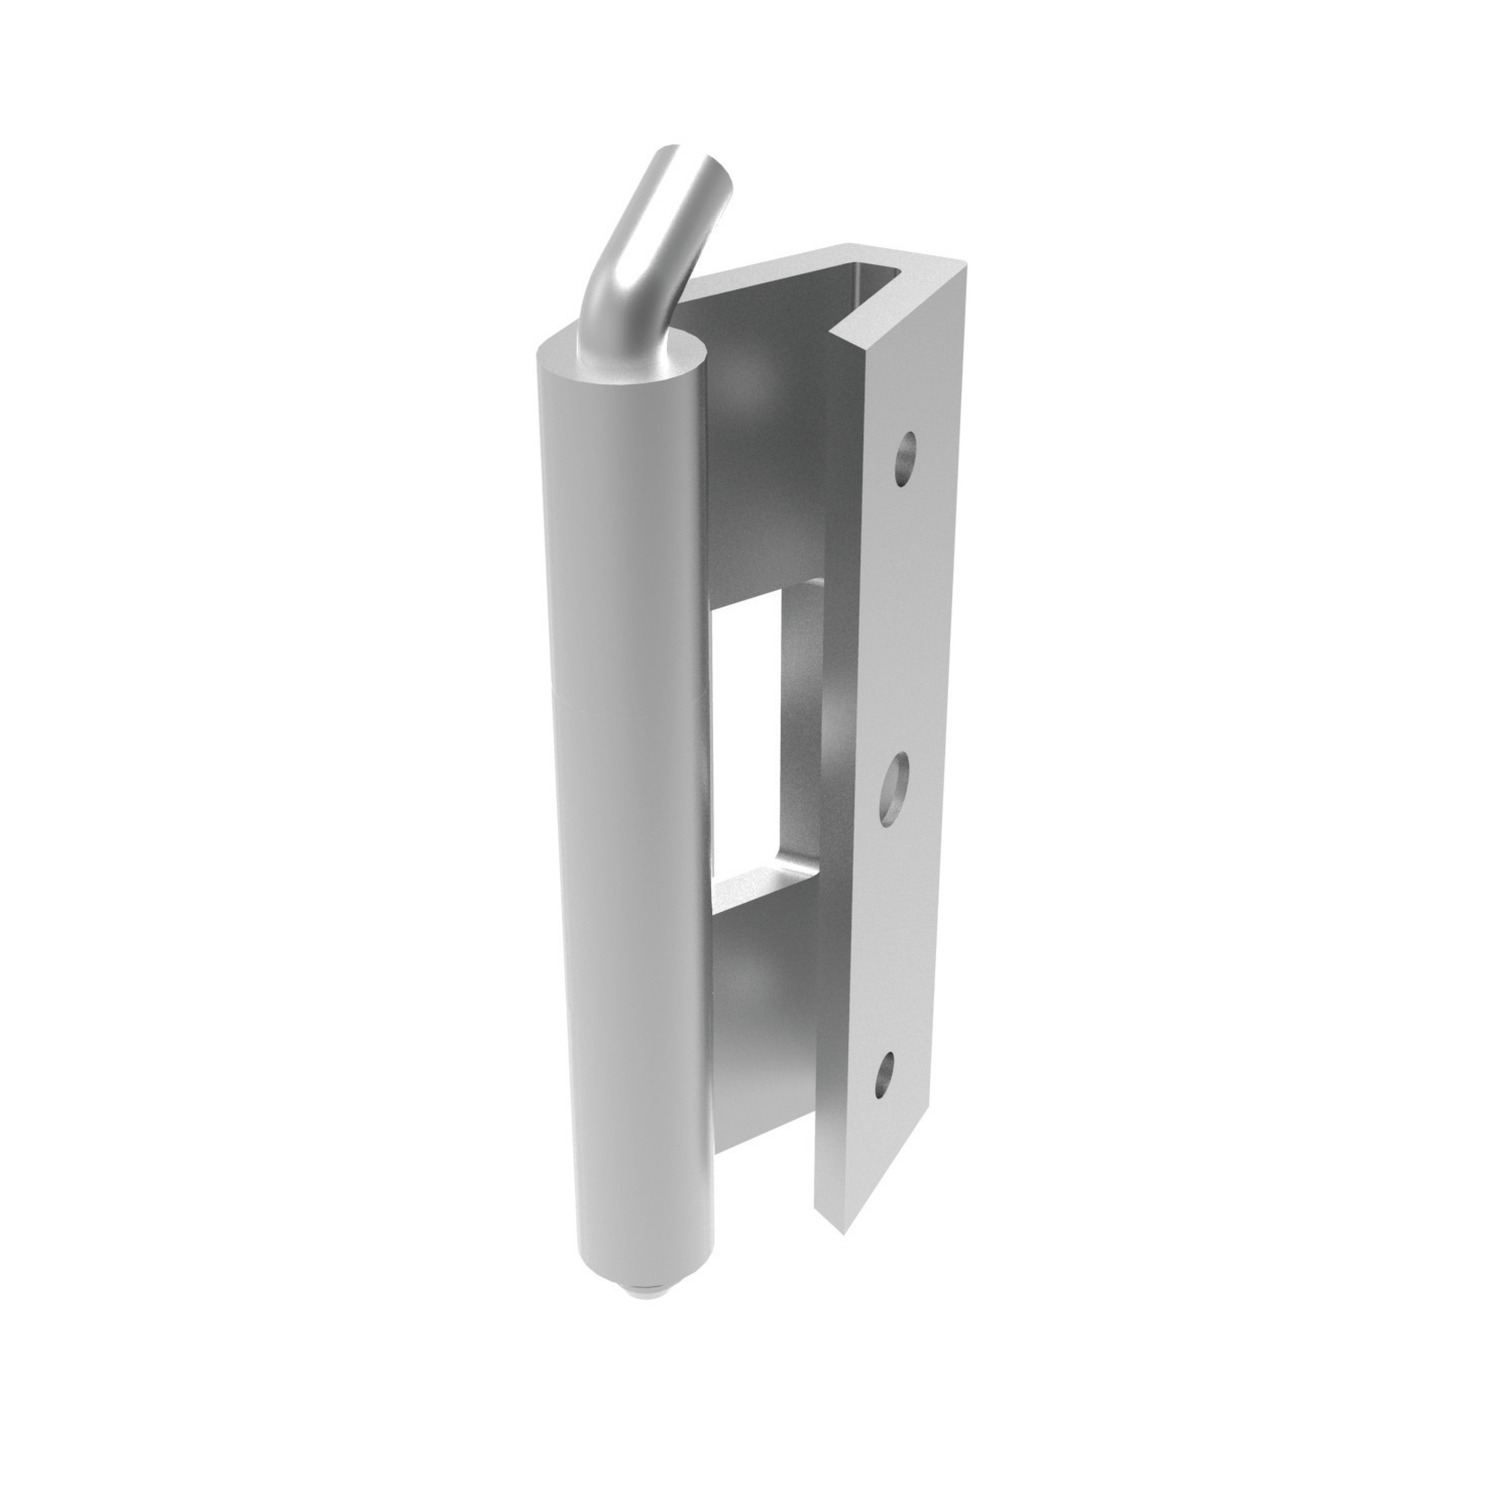 S2153.AW0022 Concealed Pivot Hinges weld and countersunk screw